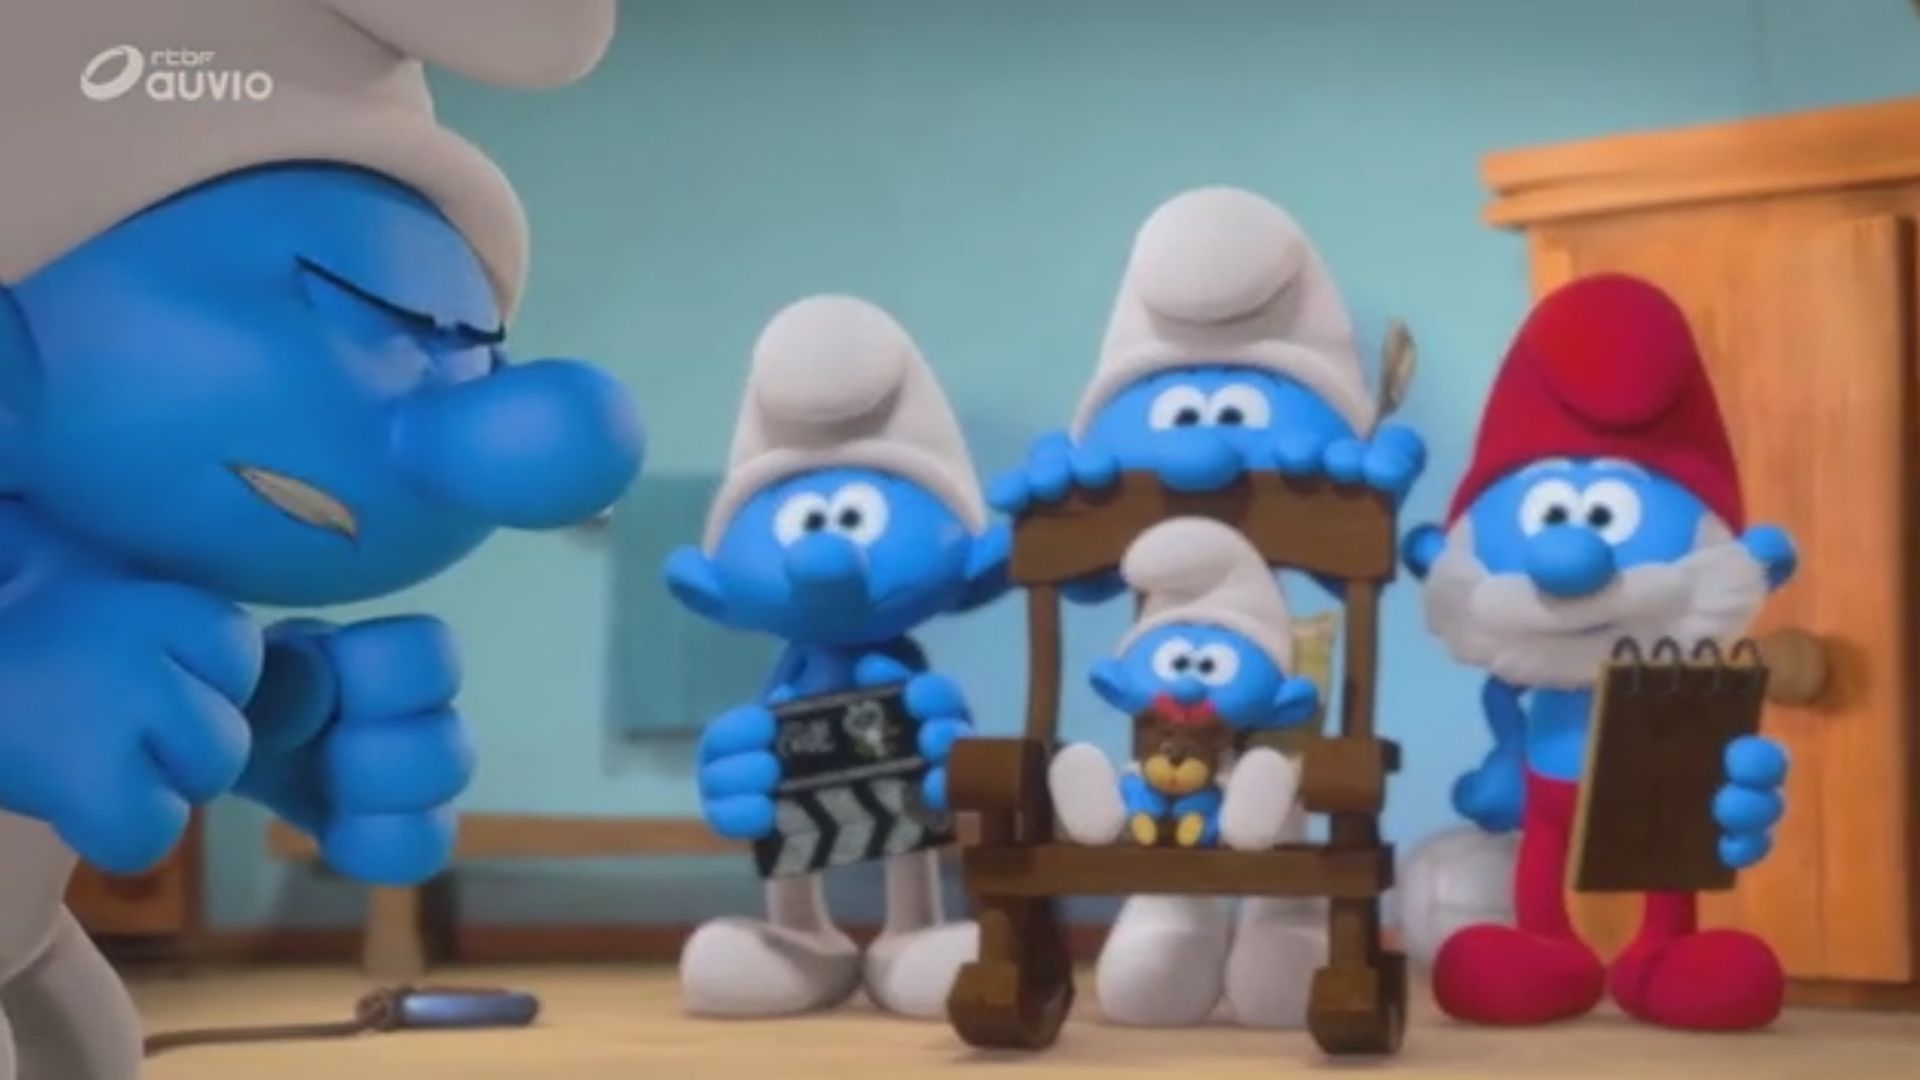 The Smurfs background